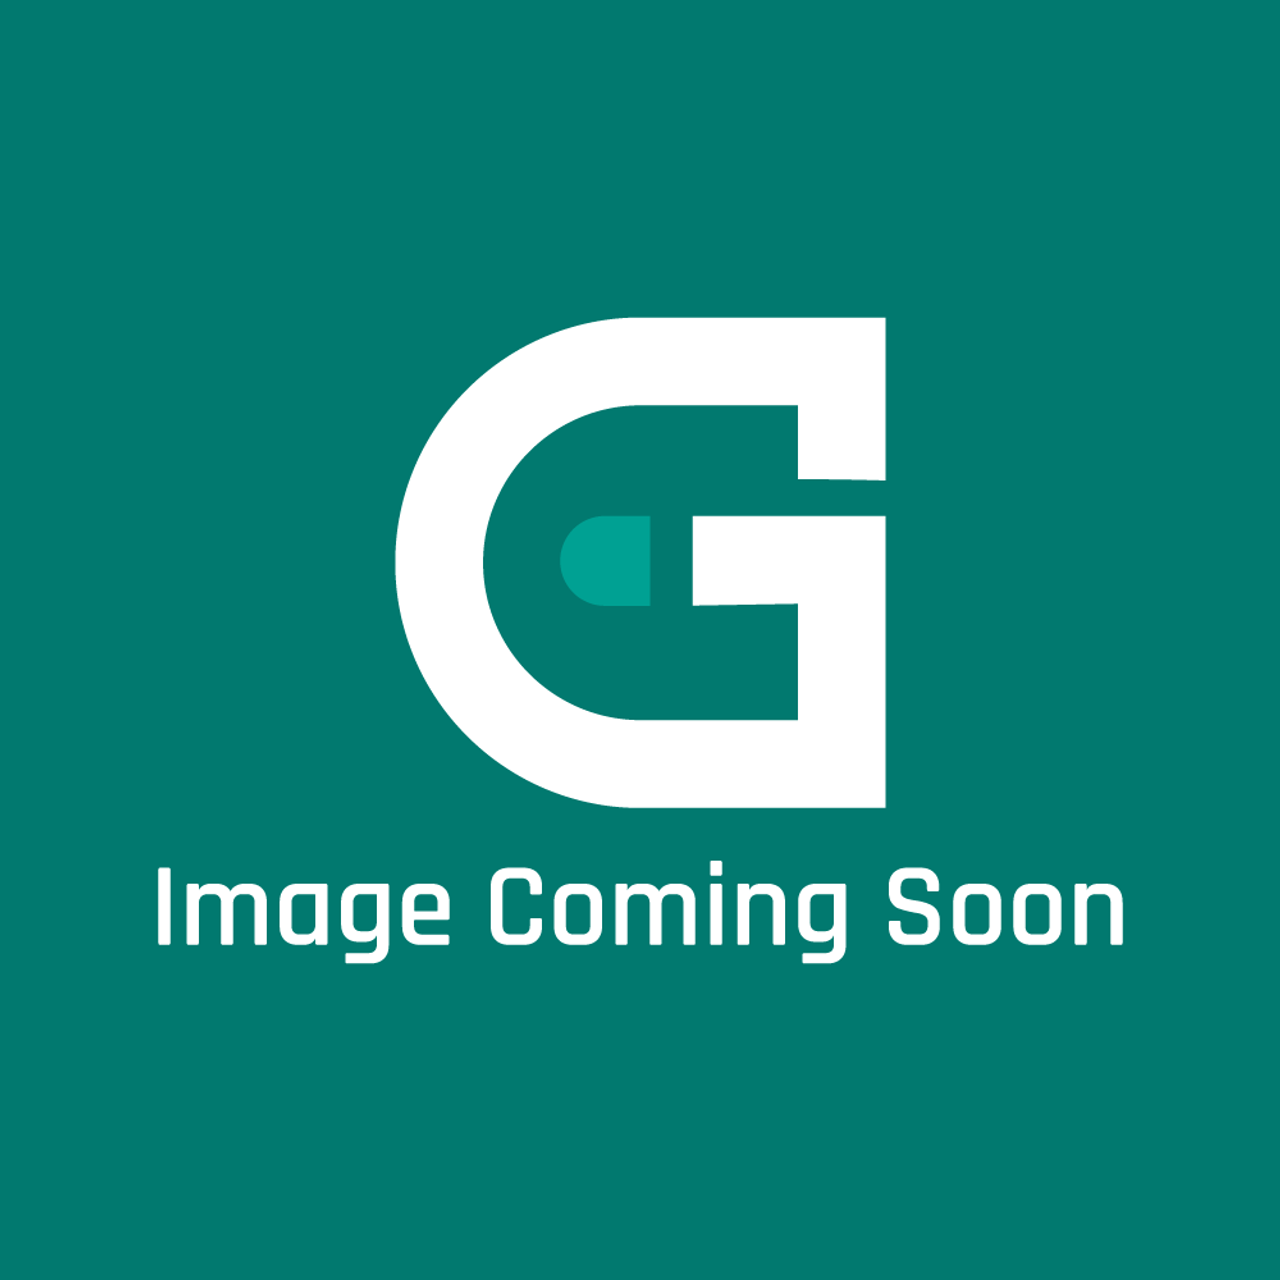 Garland 98300086 - Griddle Plate 2 X 5Kw, 2 08V In - Image Coming Soon!